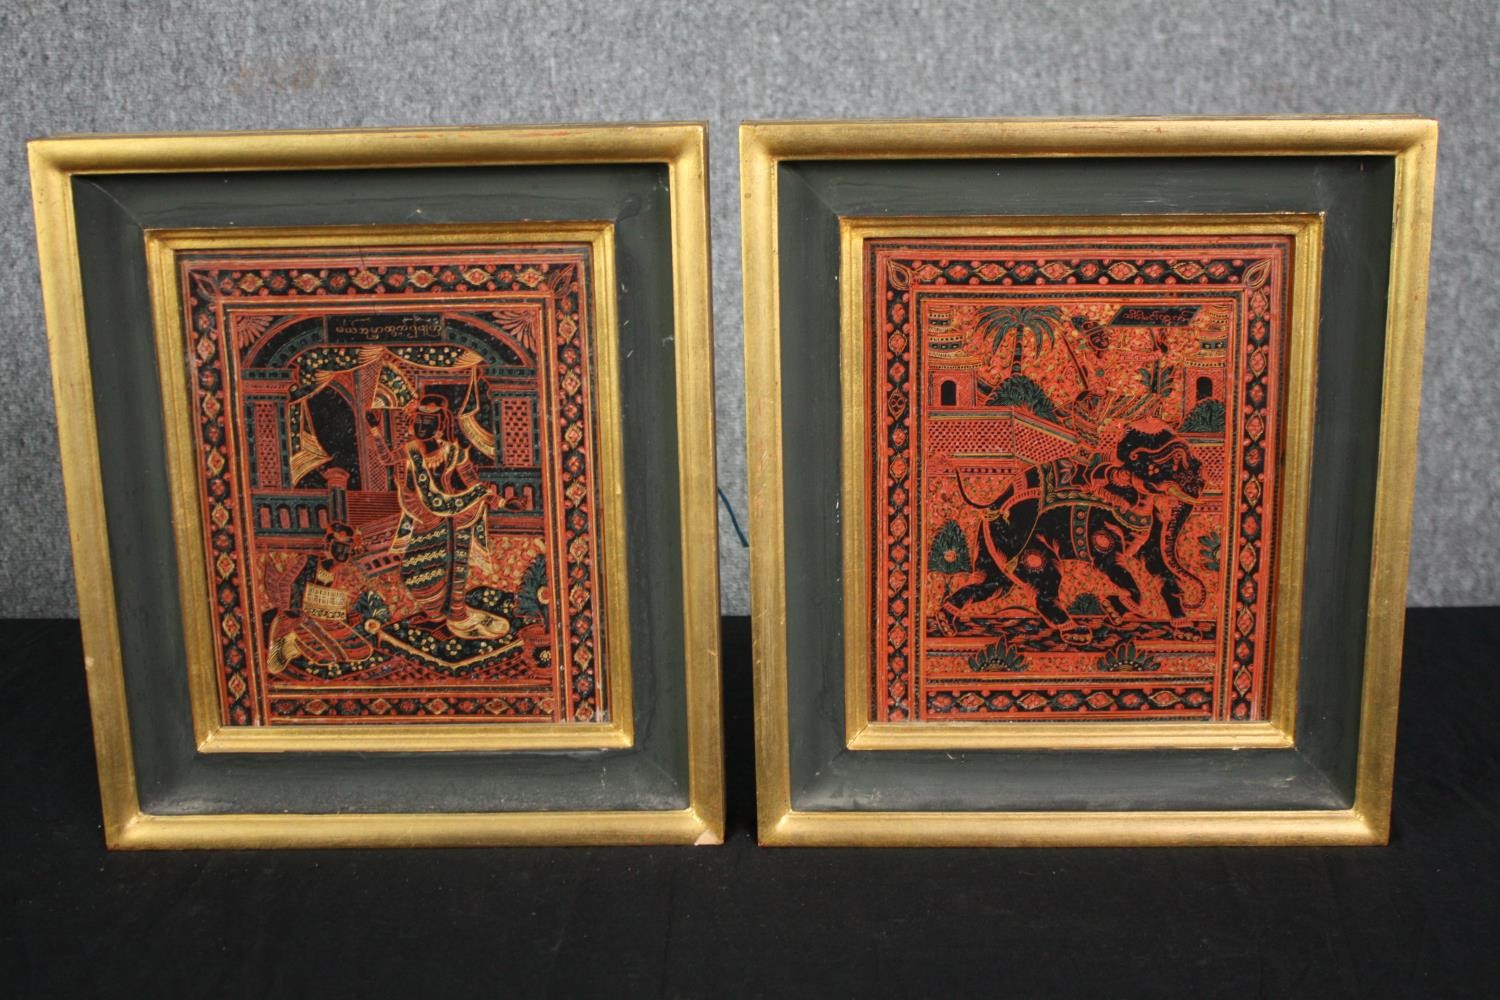 A pair of etched and lacquered Thai panels in gilt frames. H.34 W.30cm. (Each).